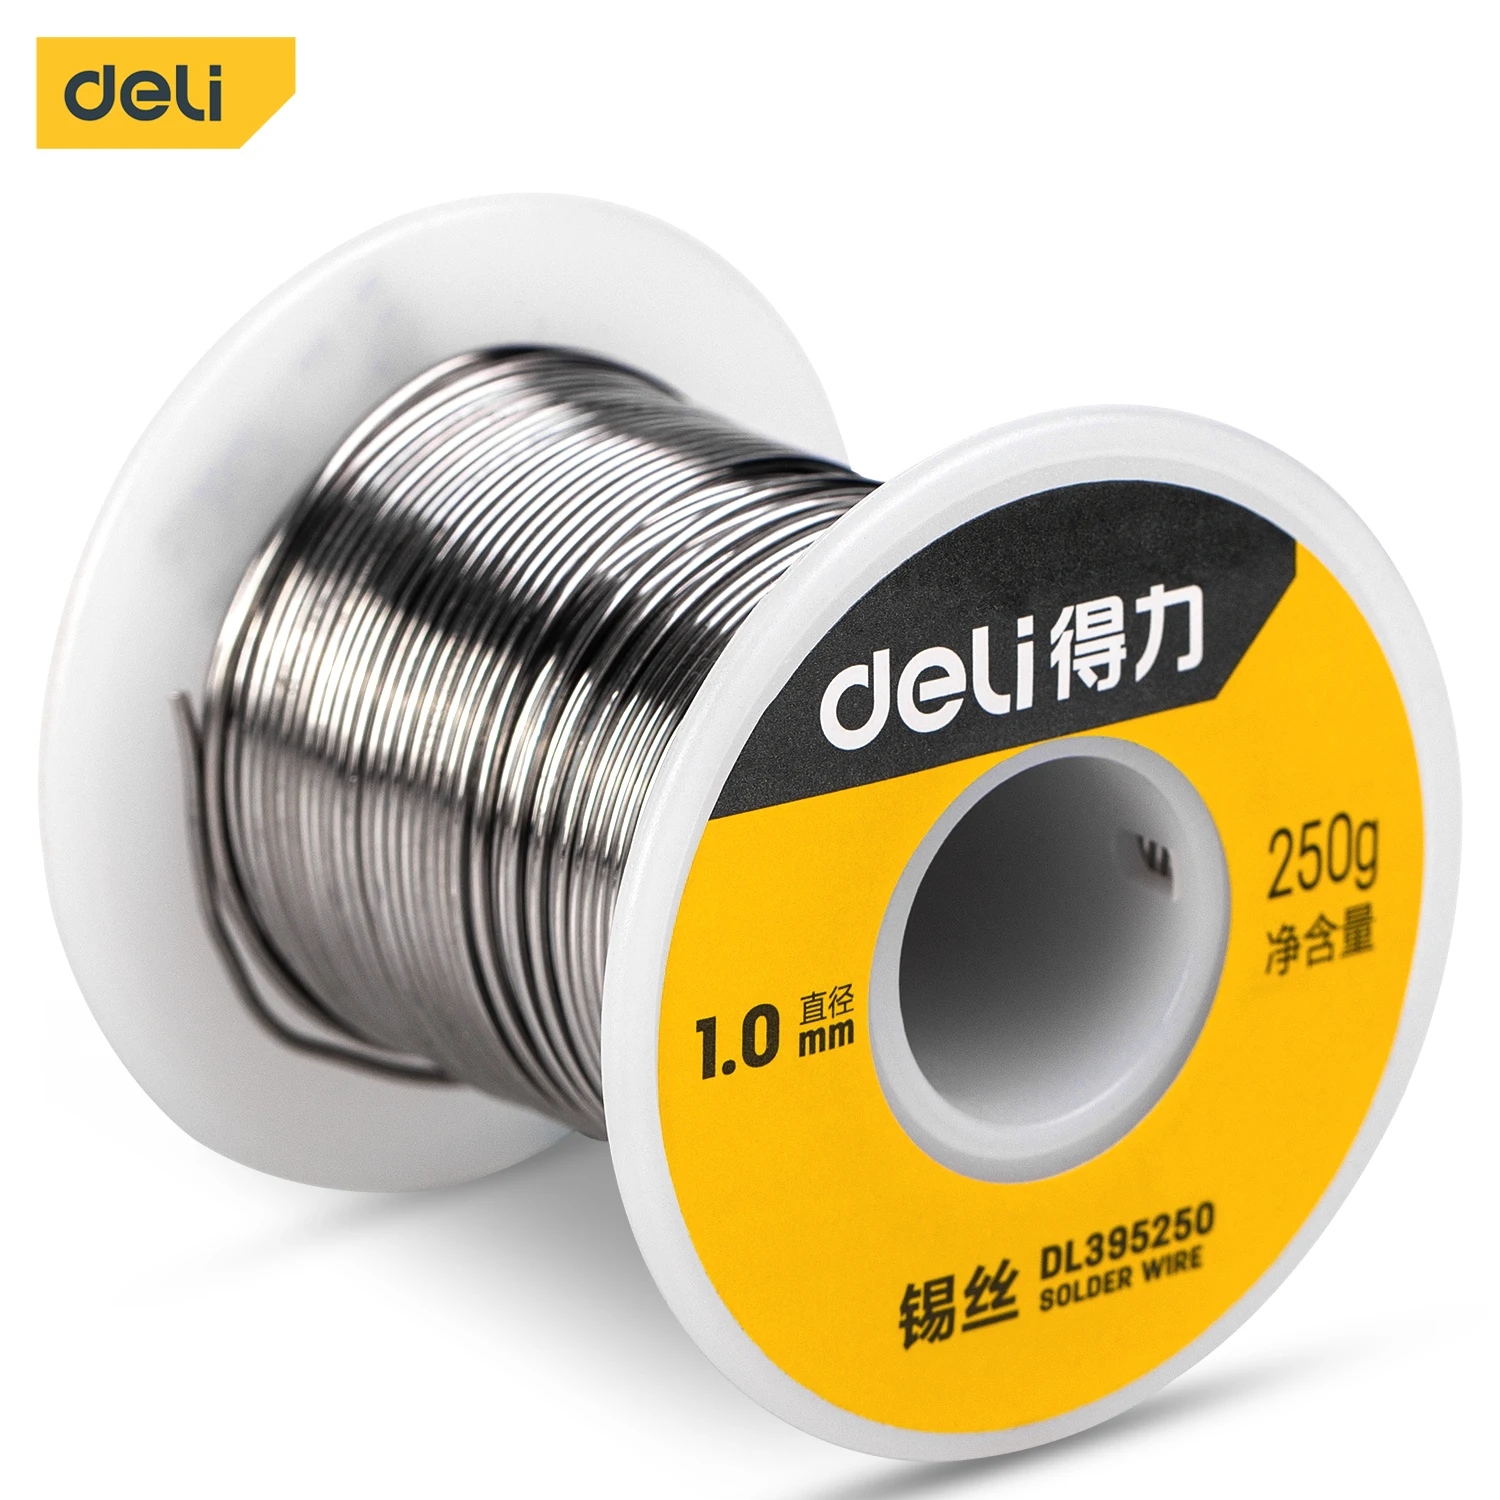 

Deli Tools 1.0mm 100/250g Silver Soft Tin for Welding Soldering Household Flux Core Solder Wire